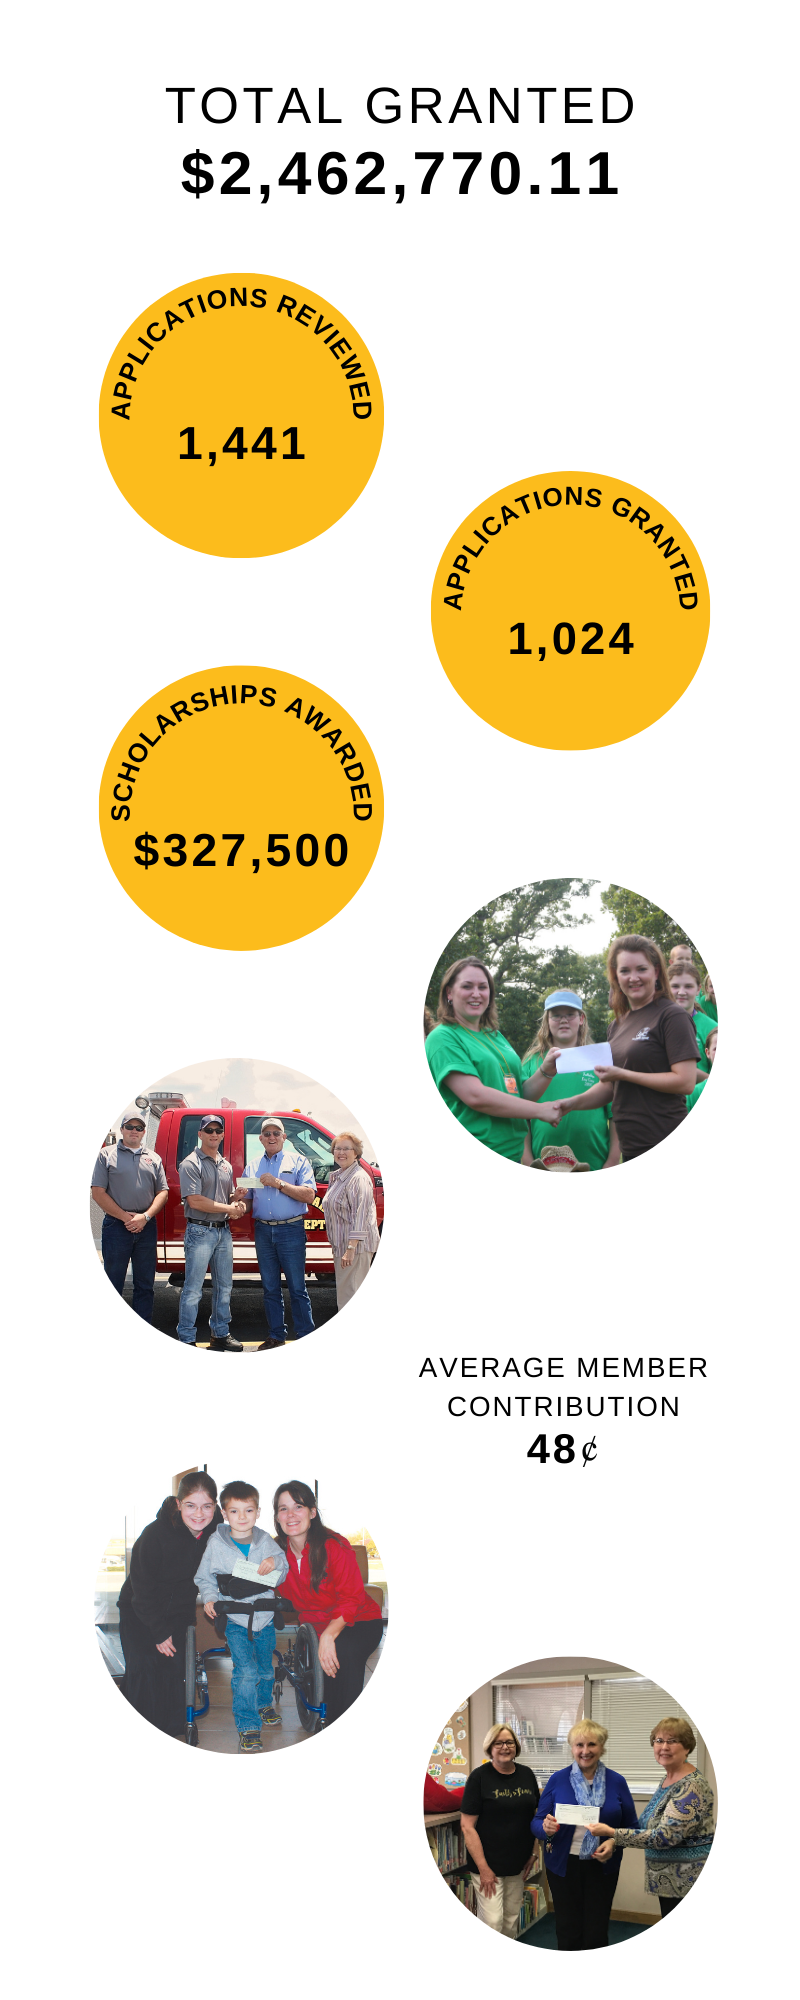 Total Granted: $2,462,770.11.  Applications Reviewed: 1,441. Applications Granted: 1,024. Scholarships Awarded: $327,500. Average Member Contribution: 48 cents.